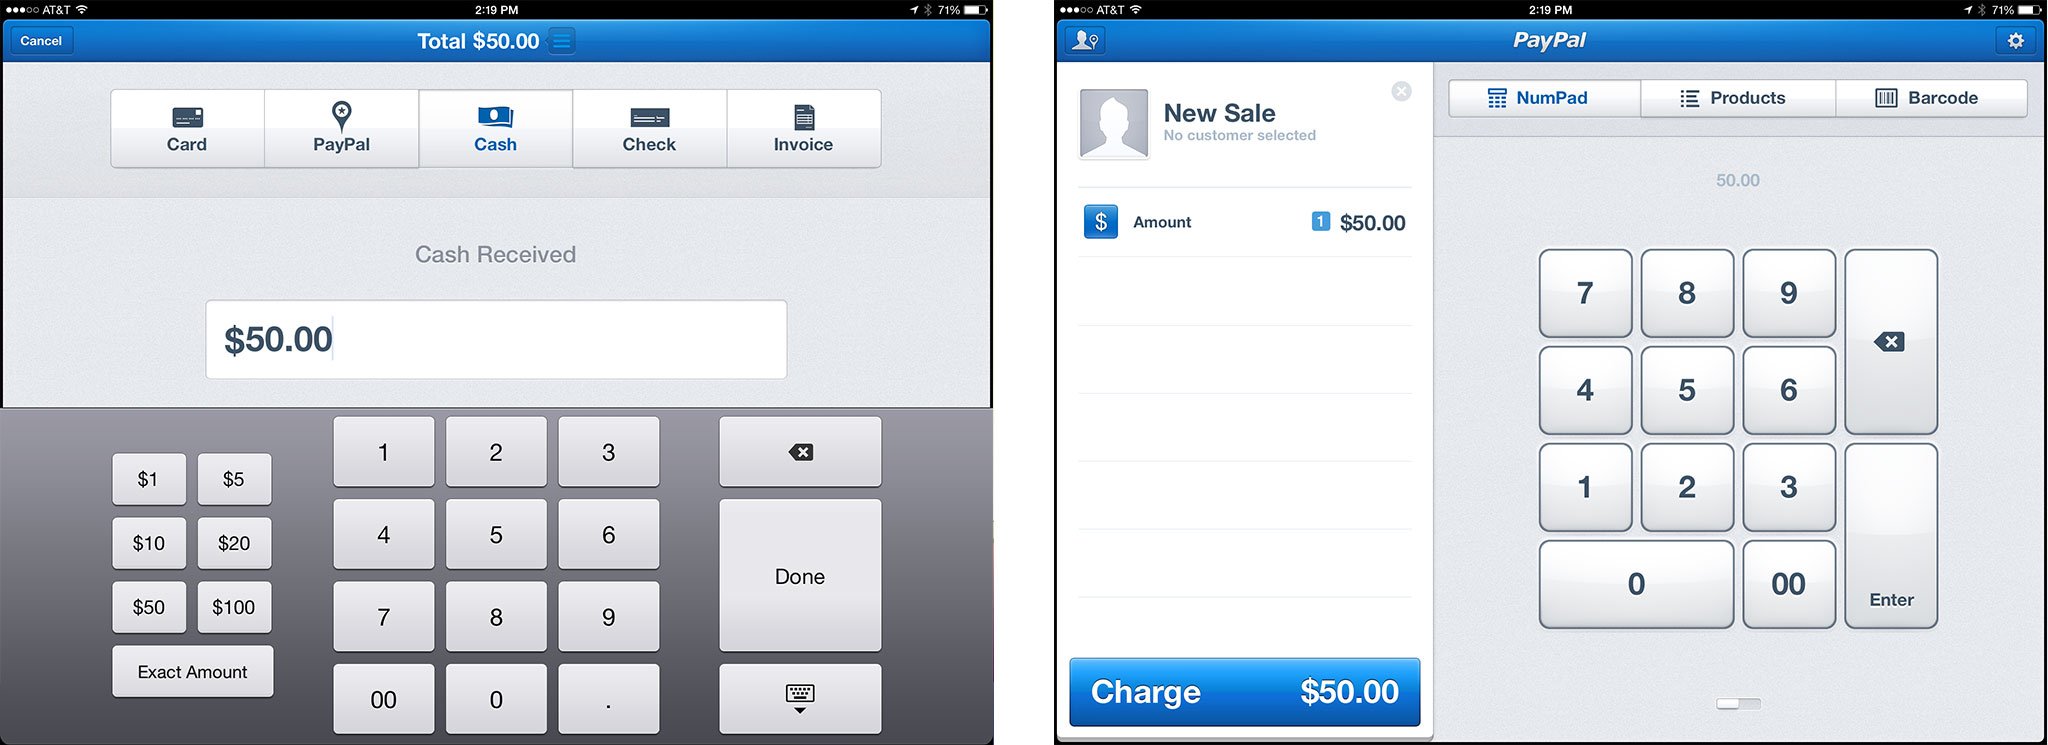 Best point of sale apps for iPhone and iPad: PayPal Here